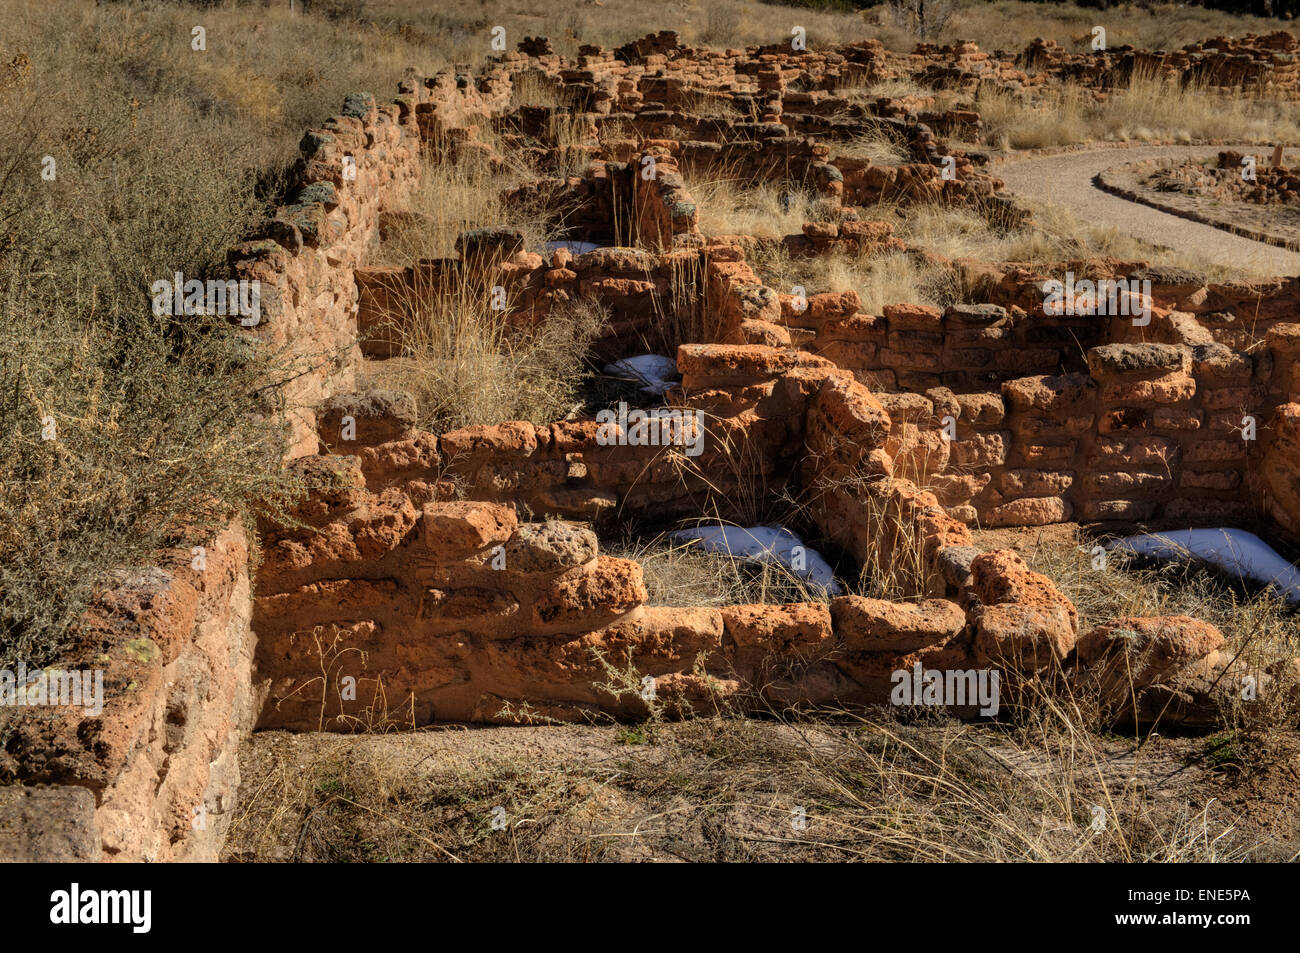 Ruins of the Tyuonyi (Que-weh-nee) pueblo at Bandelier National Monument near Los Alamos, New Mexico. Stock Photo